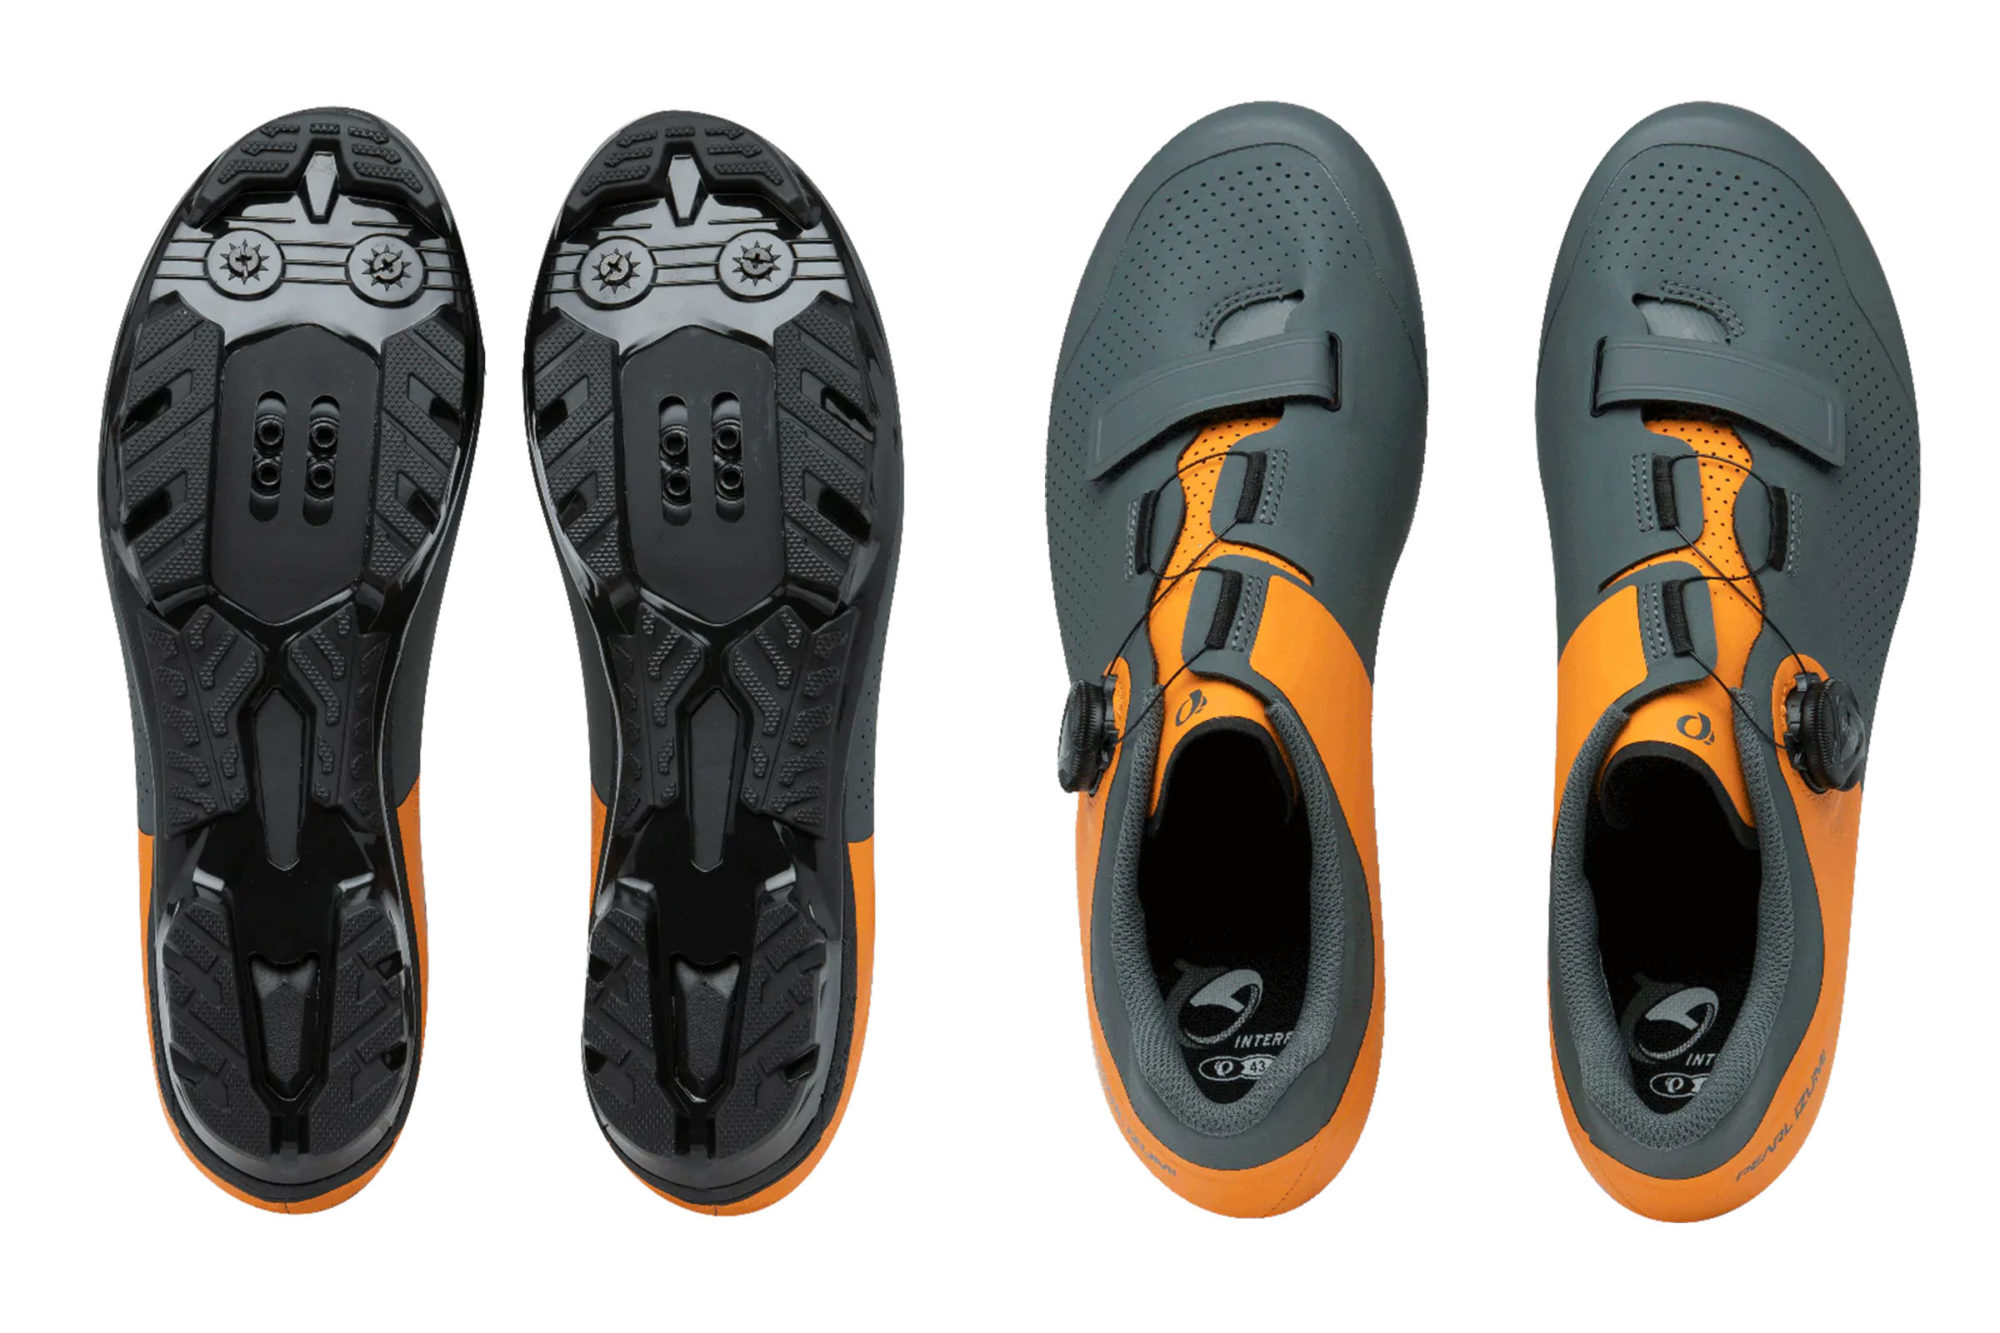 New Pearl Izumi Expedition Shoes Announced - BIKEPACKING.com